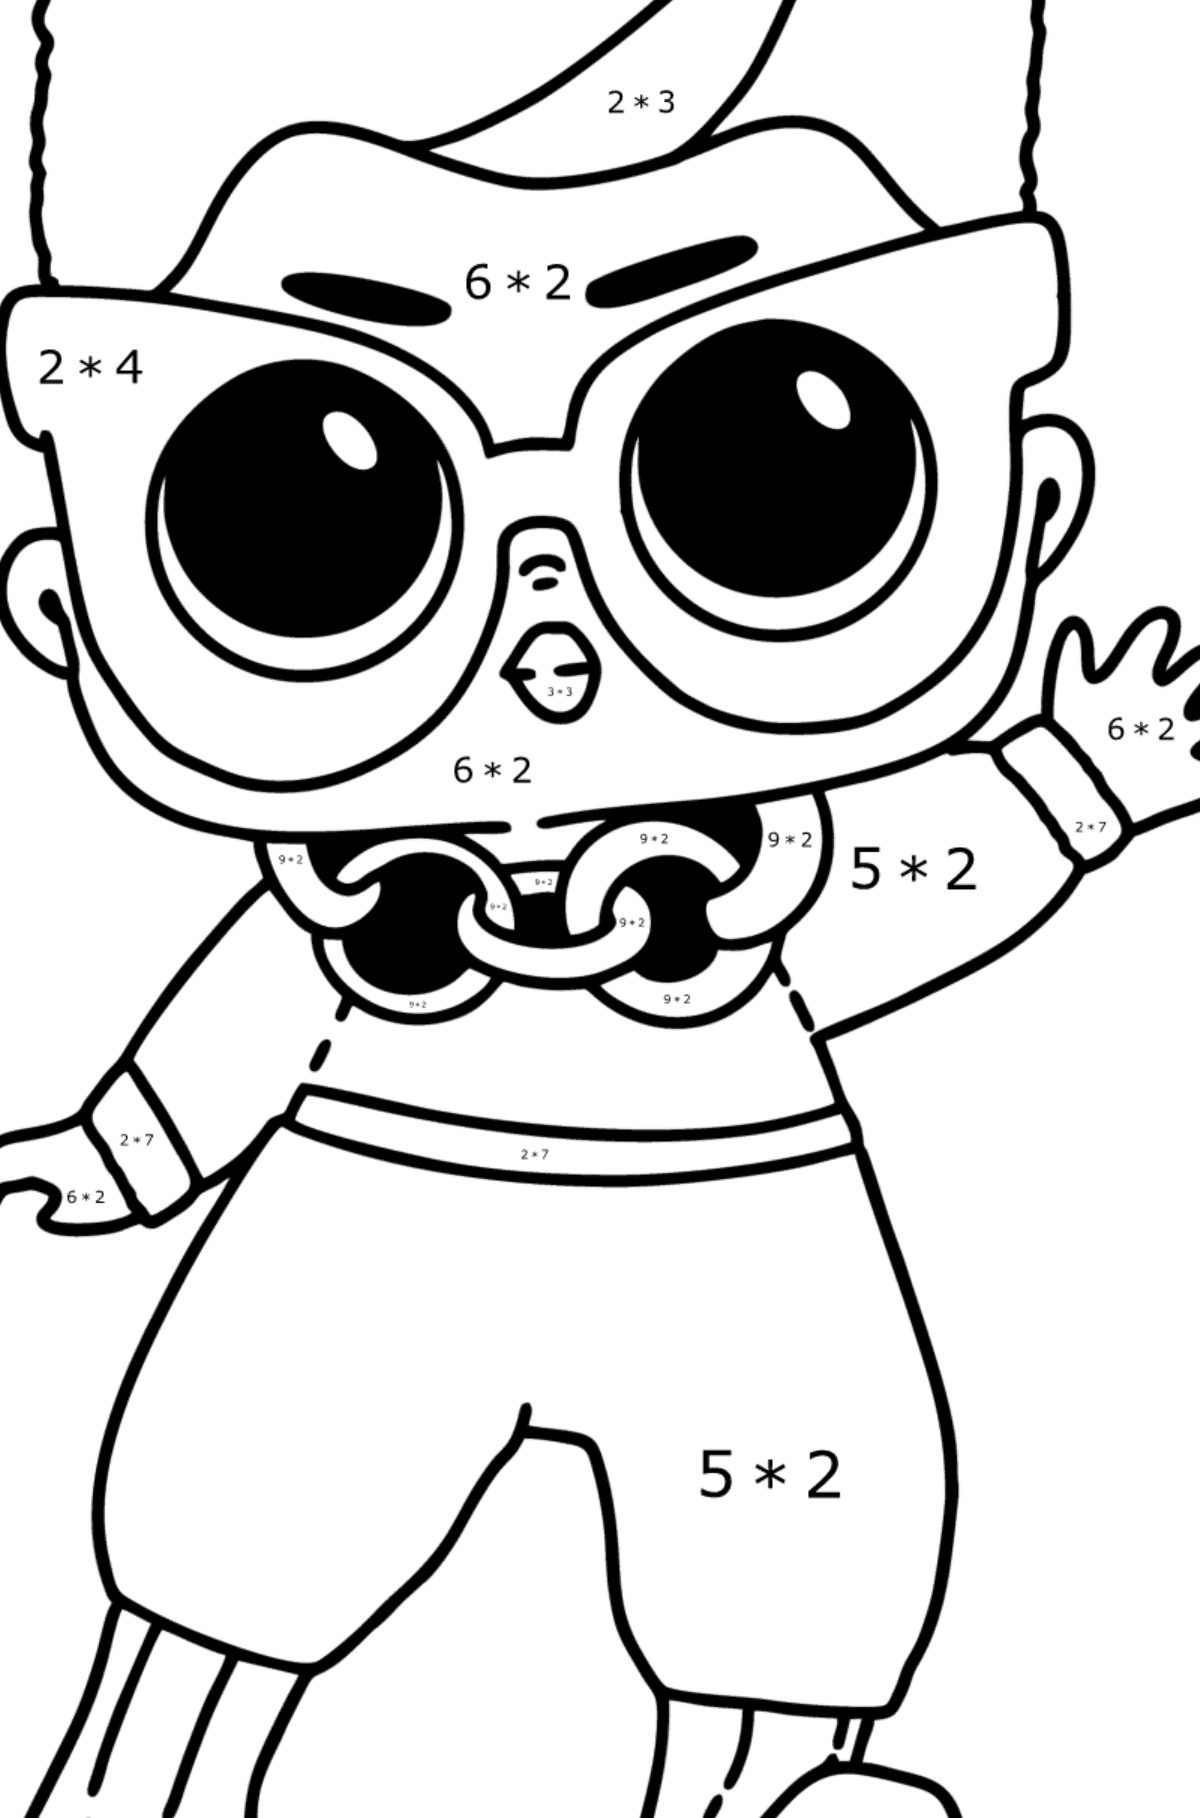 LOL Surprise Swaggie Doll Boy coloring page - Math Coloring - Multiplication for Kids